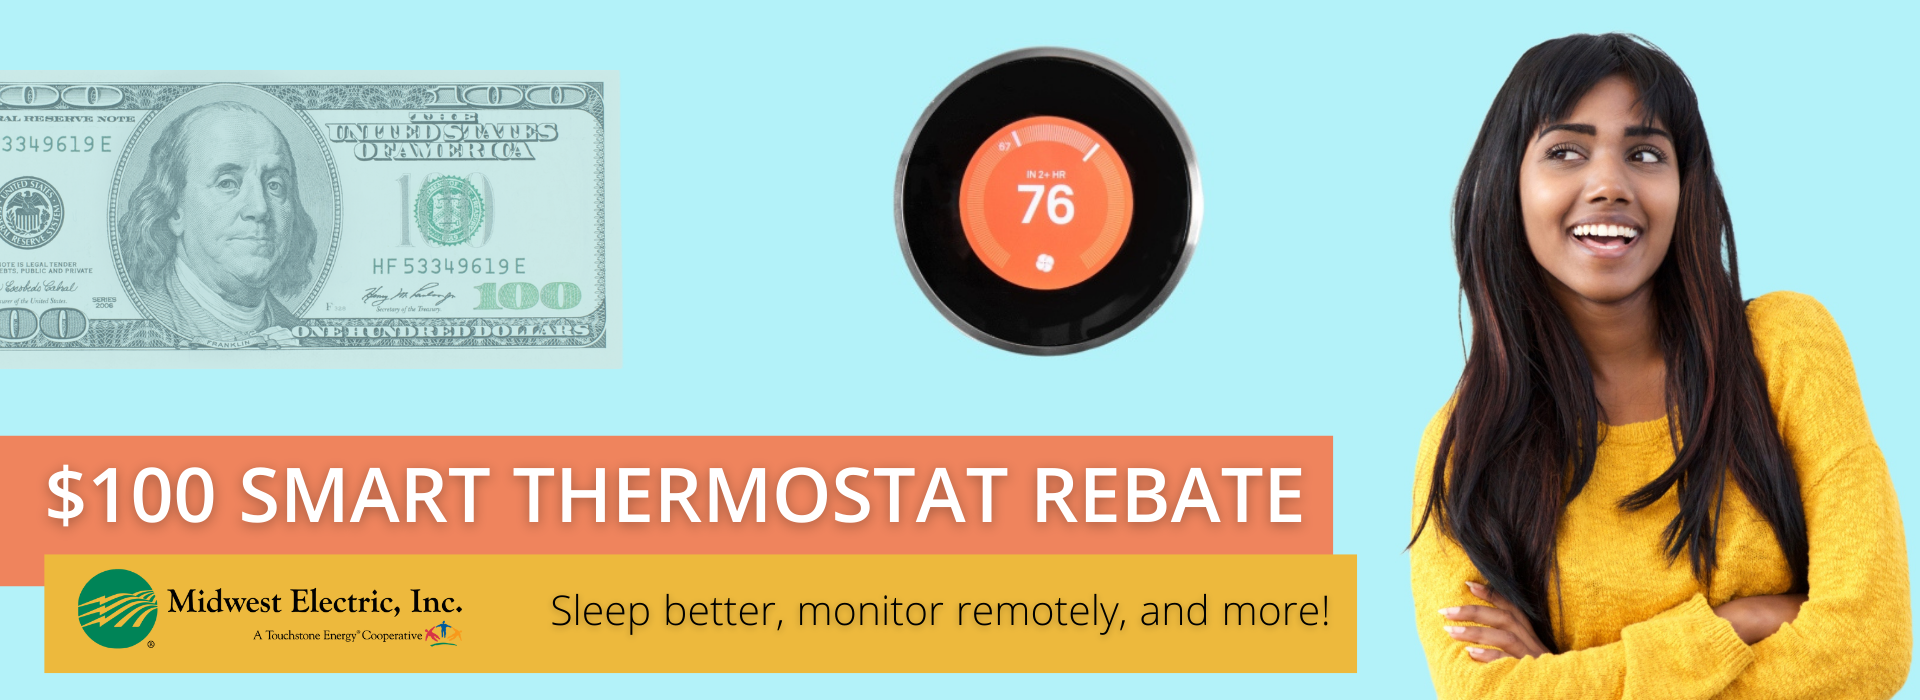 Save $100 with our smart thermostat rebate